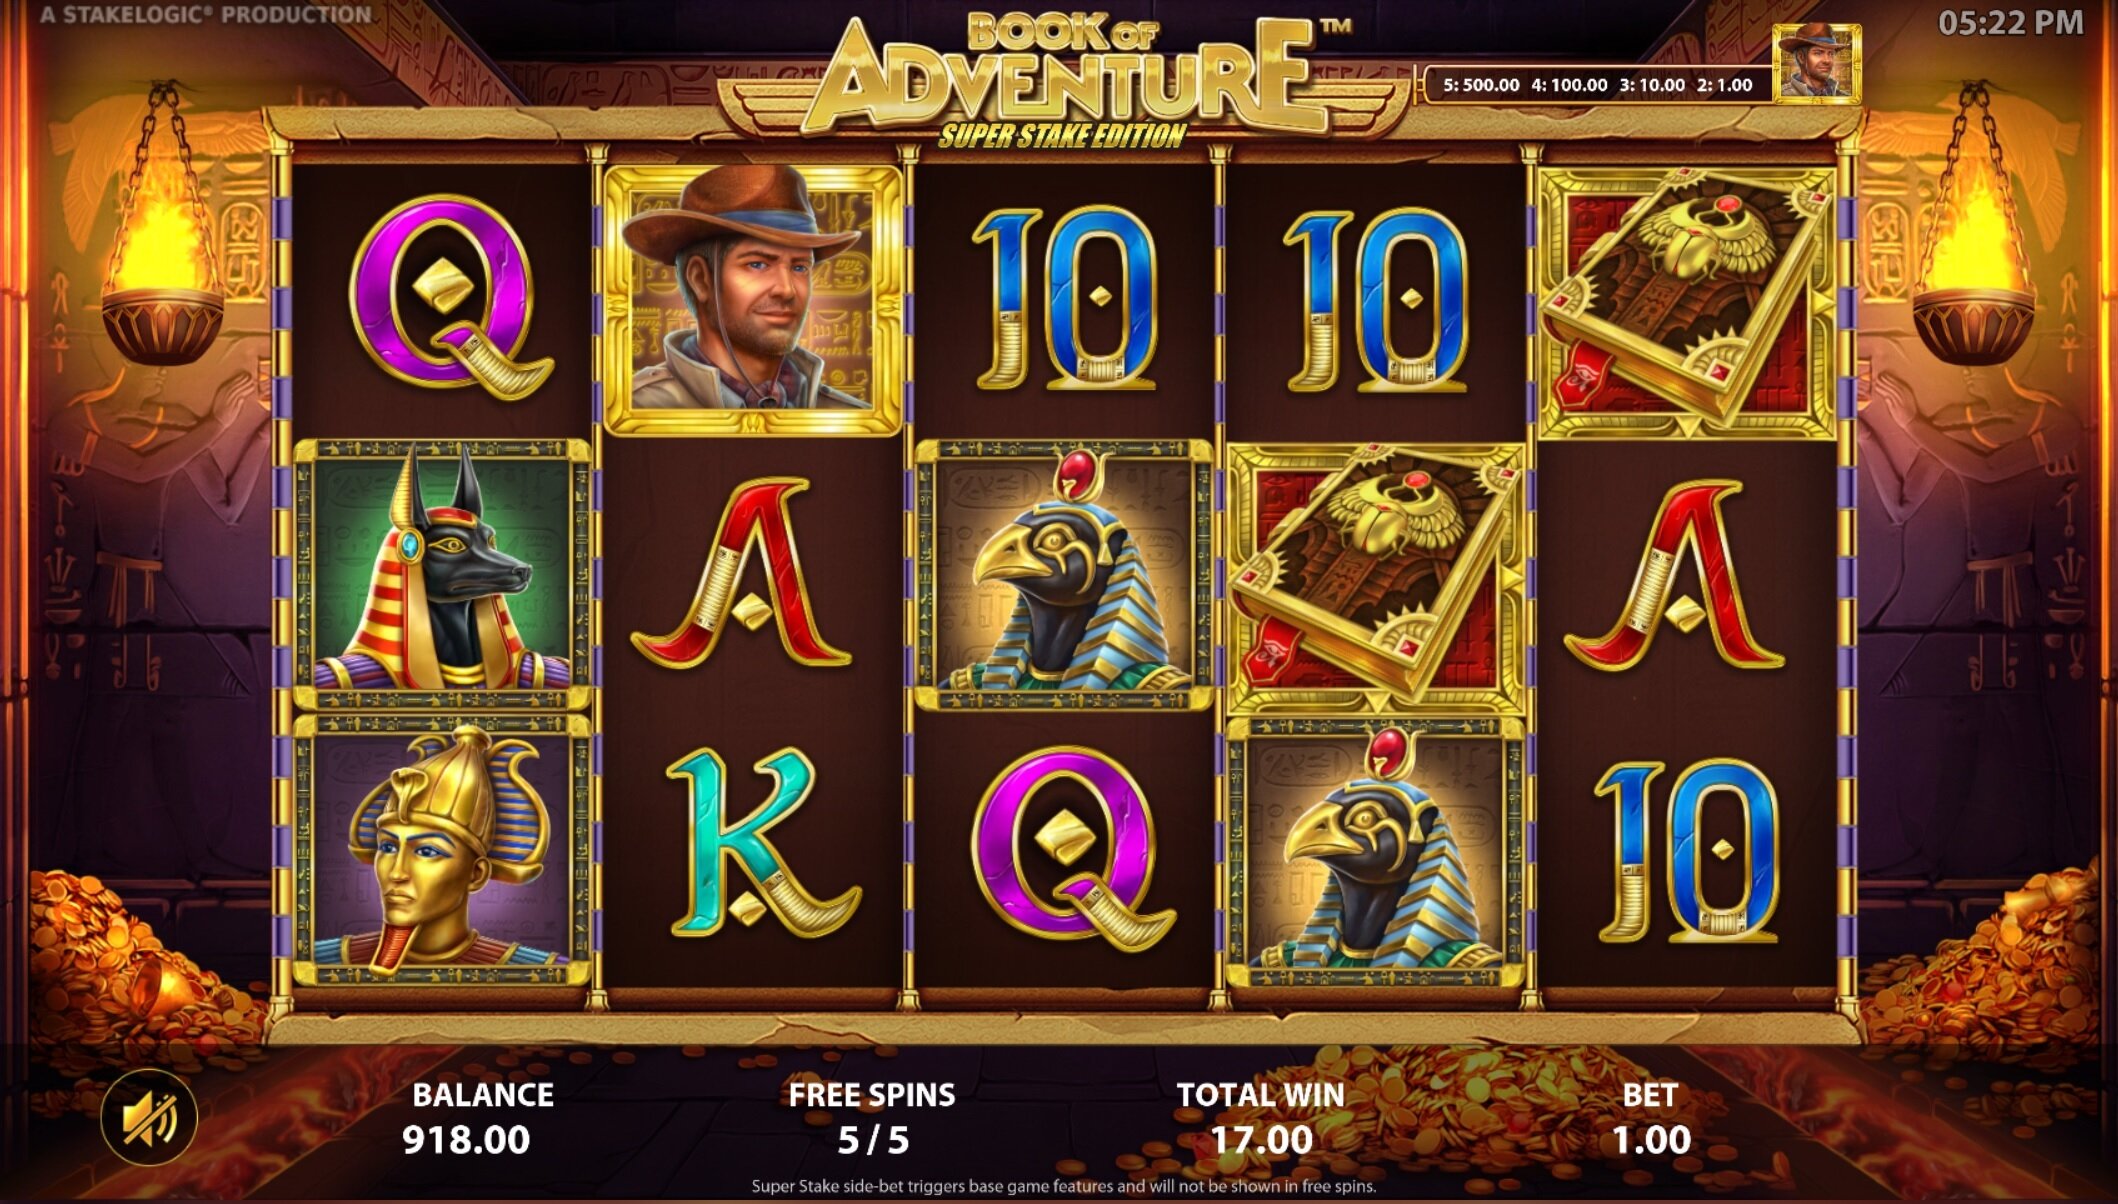 book of adventure super stake edition slot